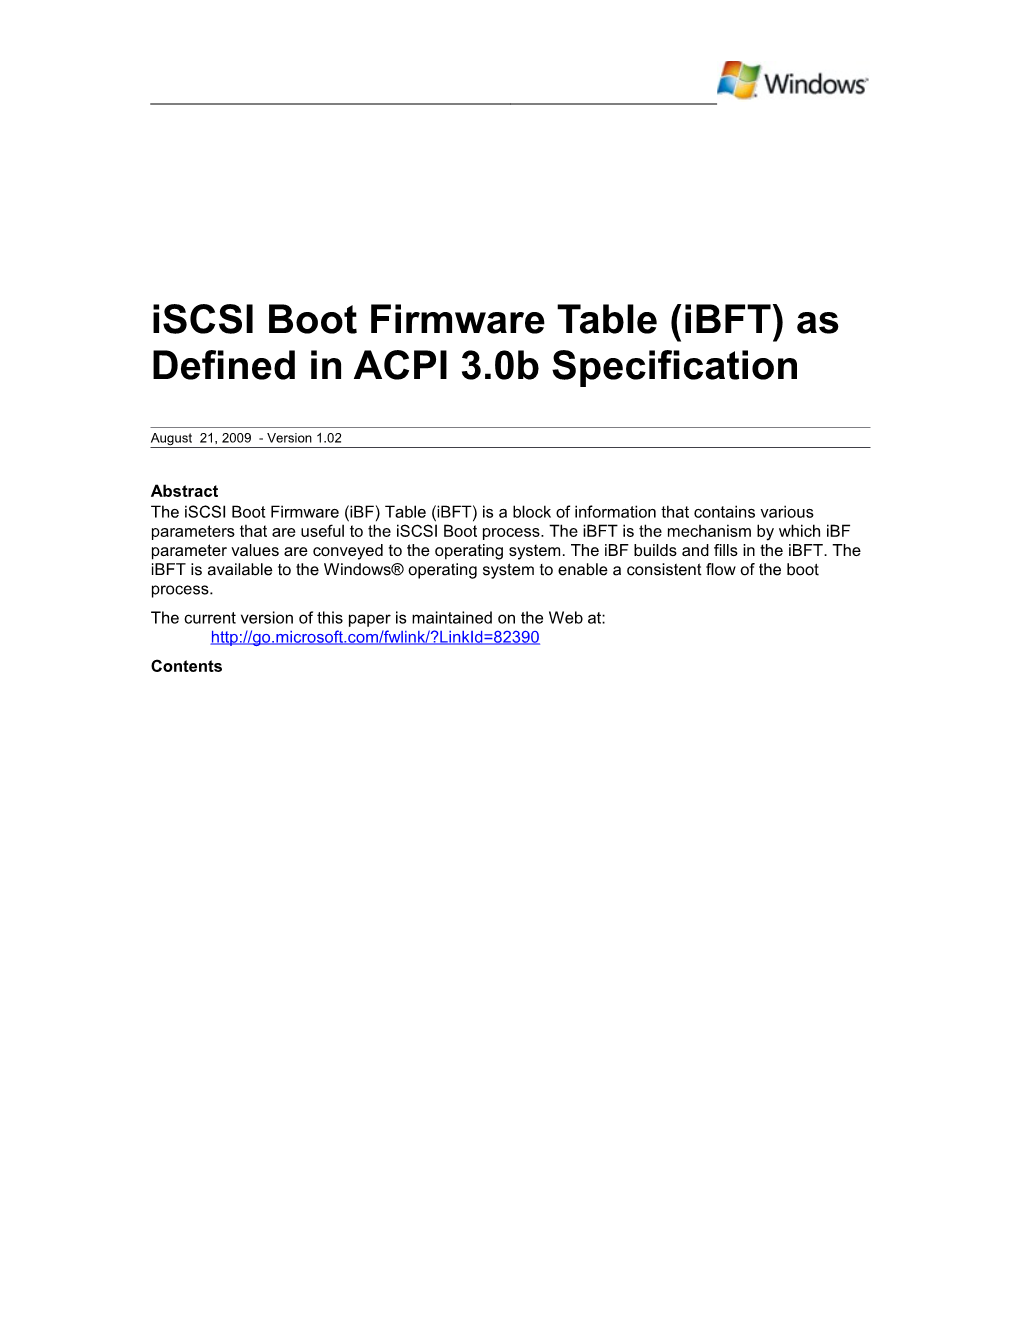 Iscsi Boot Firmware Table (Ibft) As Defined in ACPI 3.0B Specification - 1